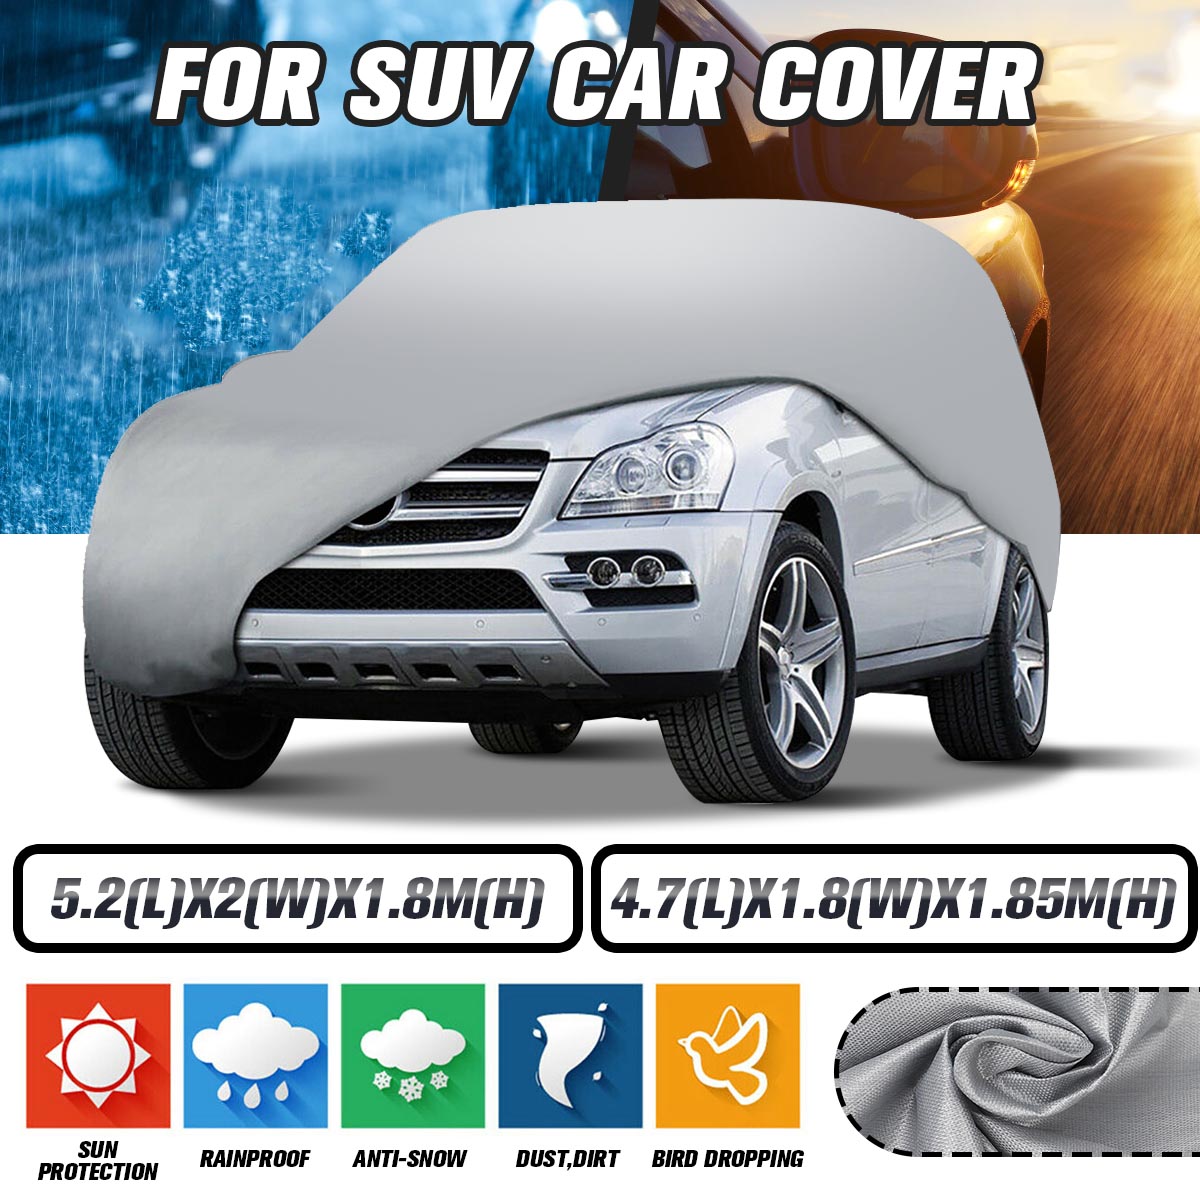 SUV Car Cover Waterproof All Weather Full Car Covers Breathable Outdoor  Indoor Windproof/Dustproof/Scratch Resistant UV Protection Fits up to  17'(17' x 6.6' x 5.9')